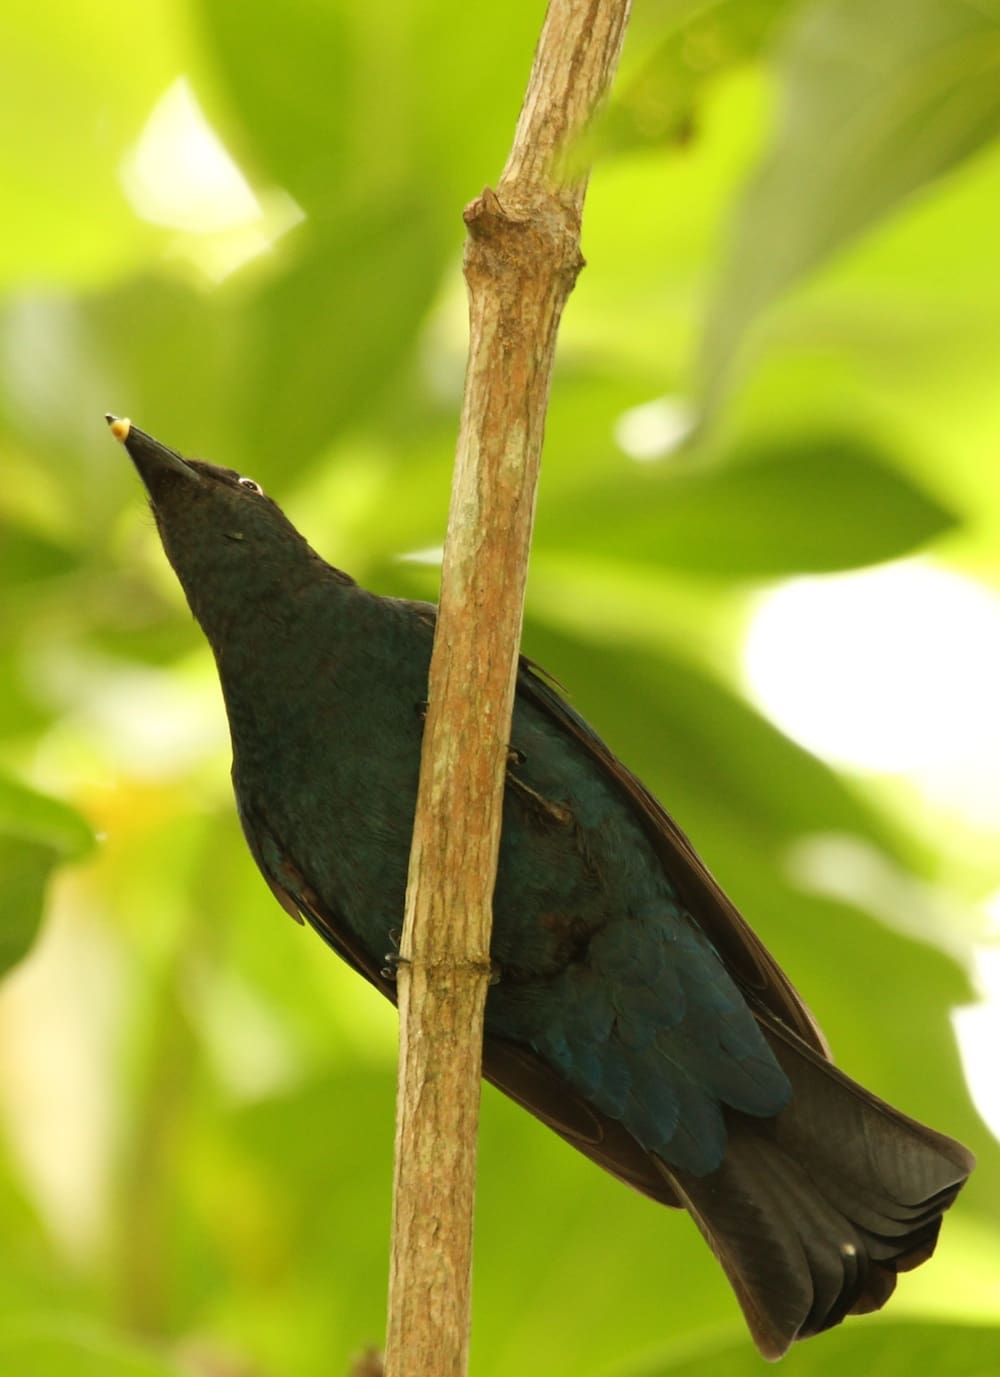 On Havelock, Andamans I had more Fairy Bluebird sightings than I have ever on the Indian peninsula